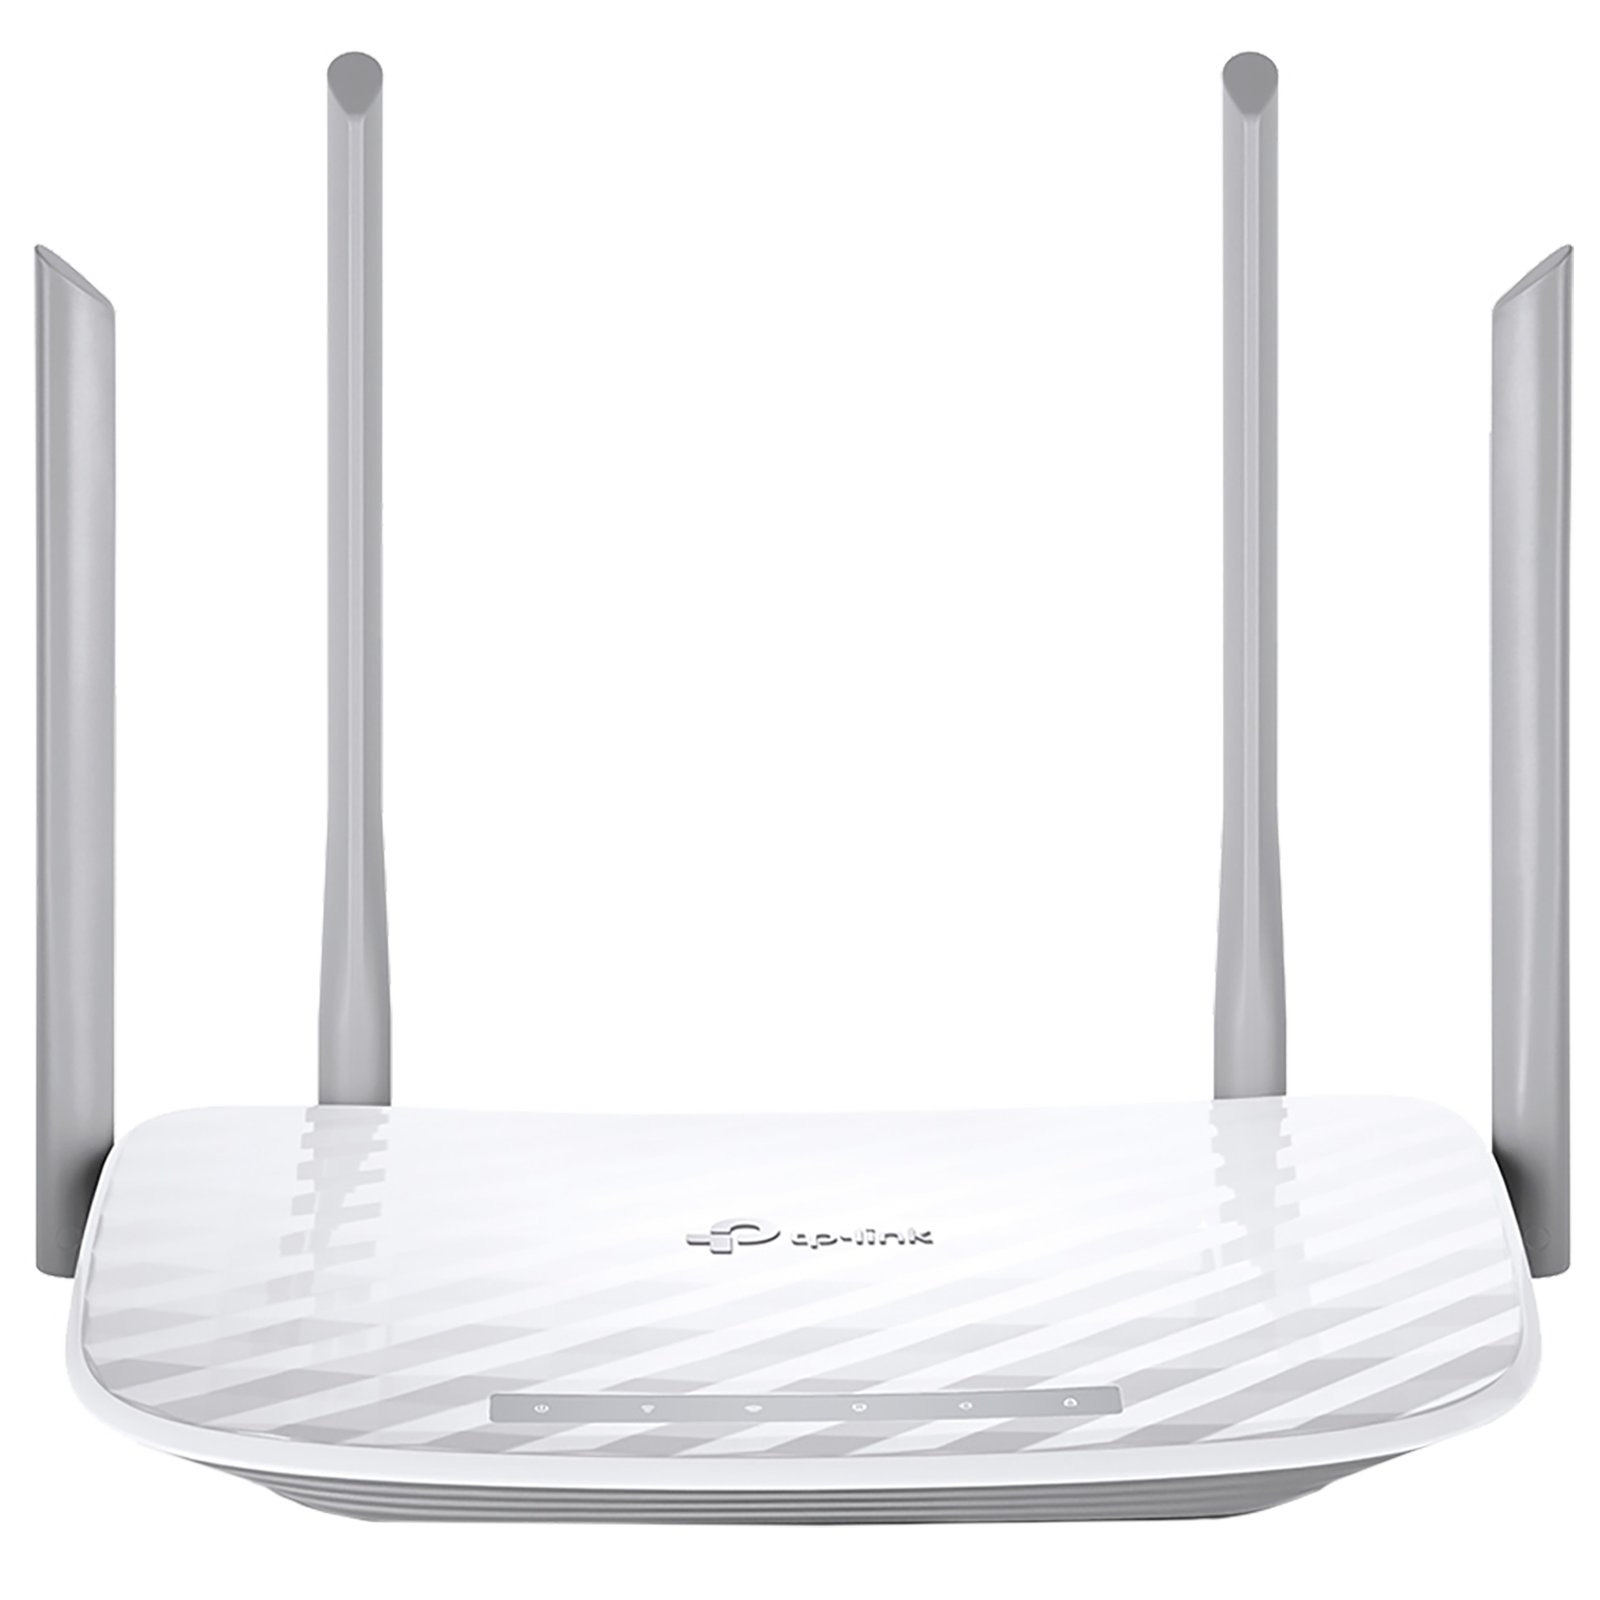 Tp-Link Archer C5 AC1200 Dual Band Wi-Fi Router (4 Antennas, 4 LAN Ports, Supports Multi-SSID, 450502277, White)_1